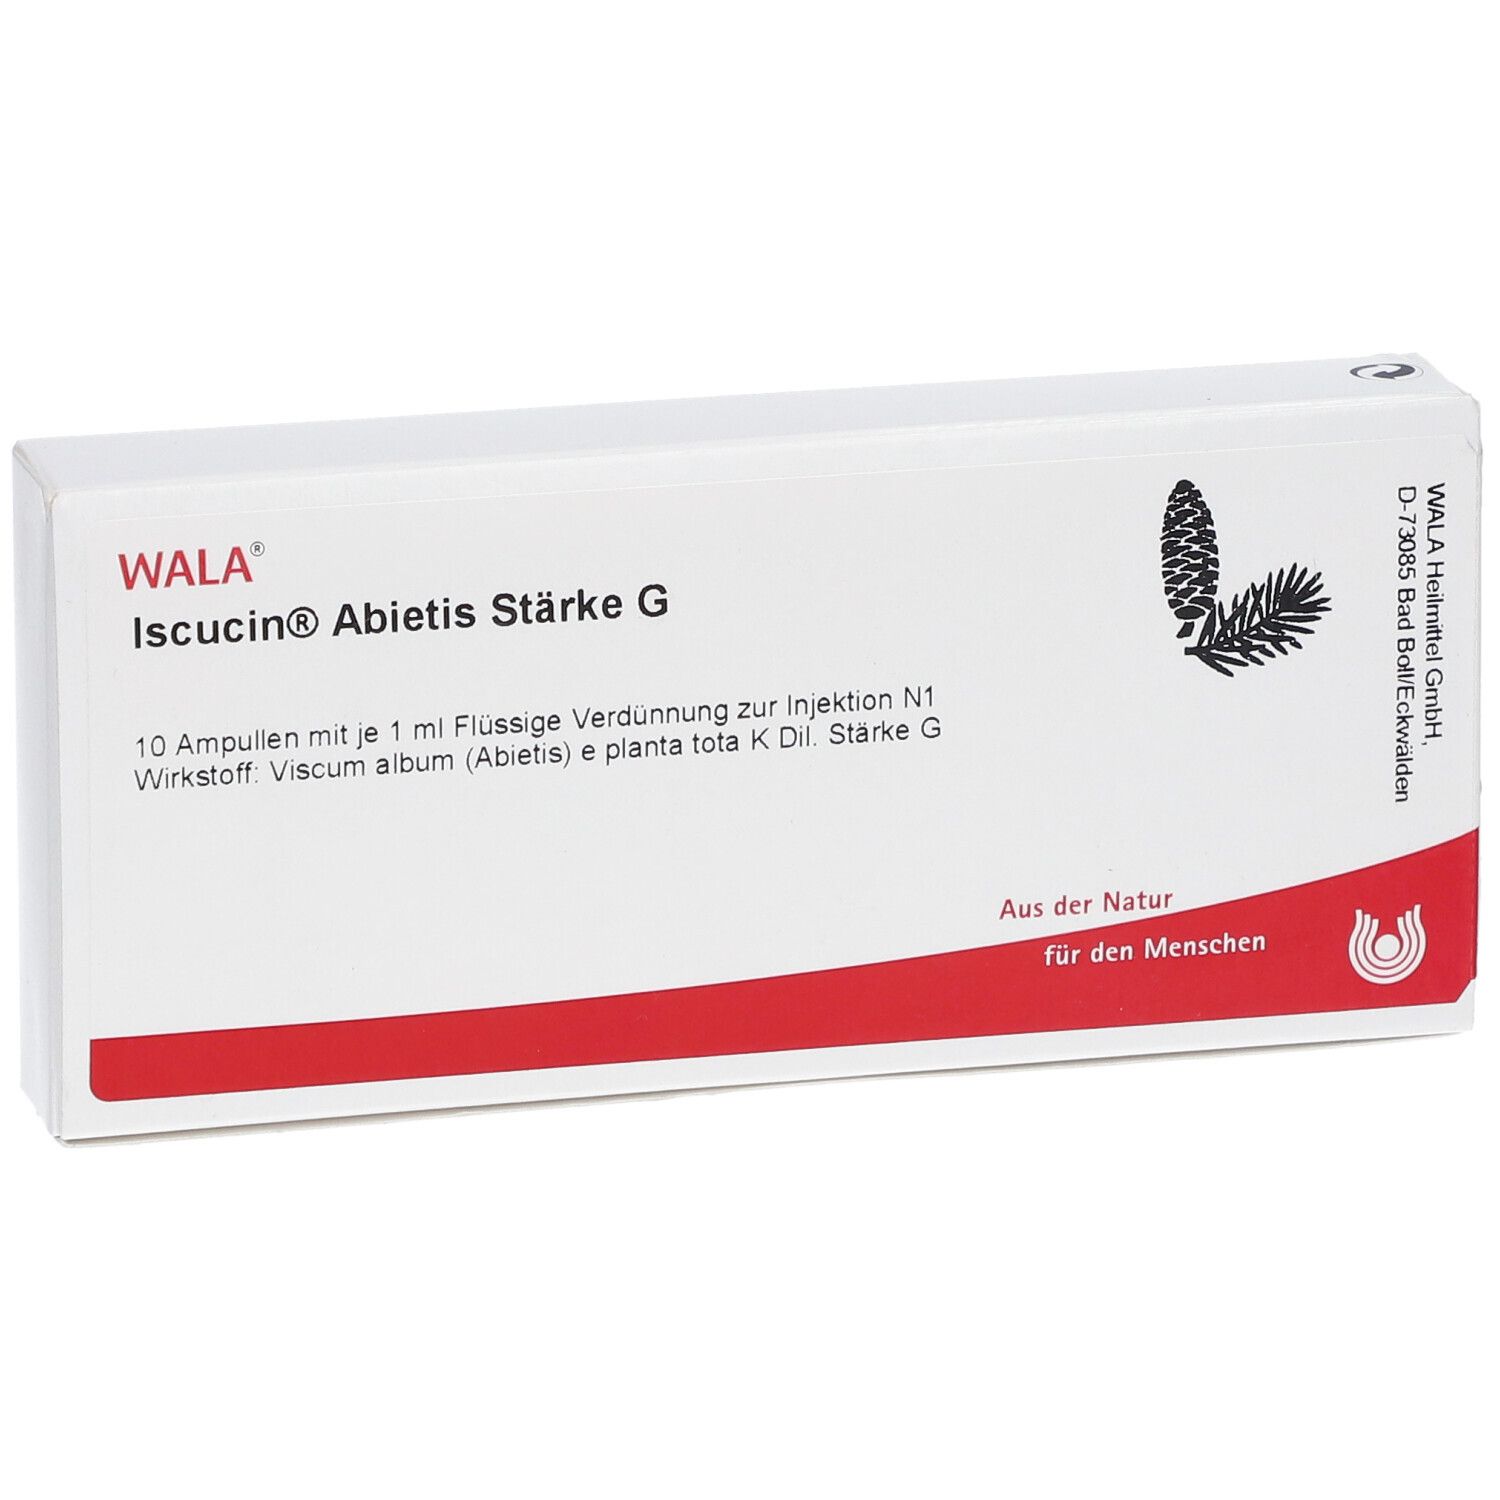 WALA® Iscucin Abietis St.G Amp.